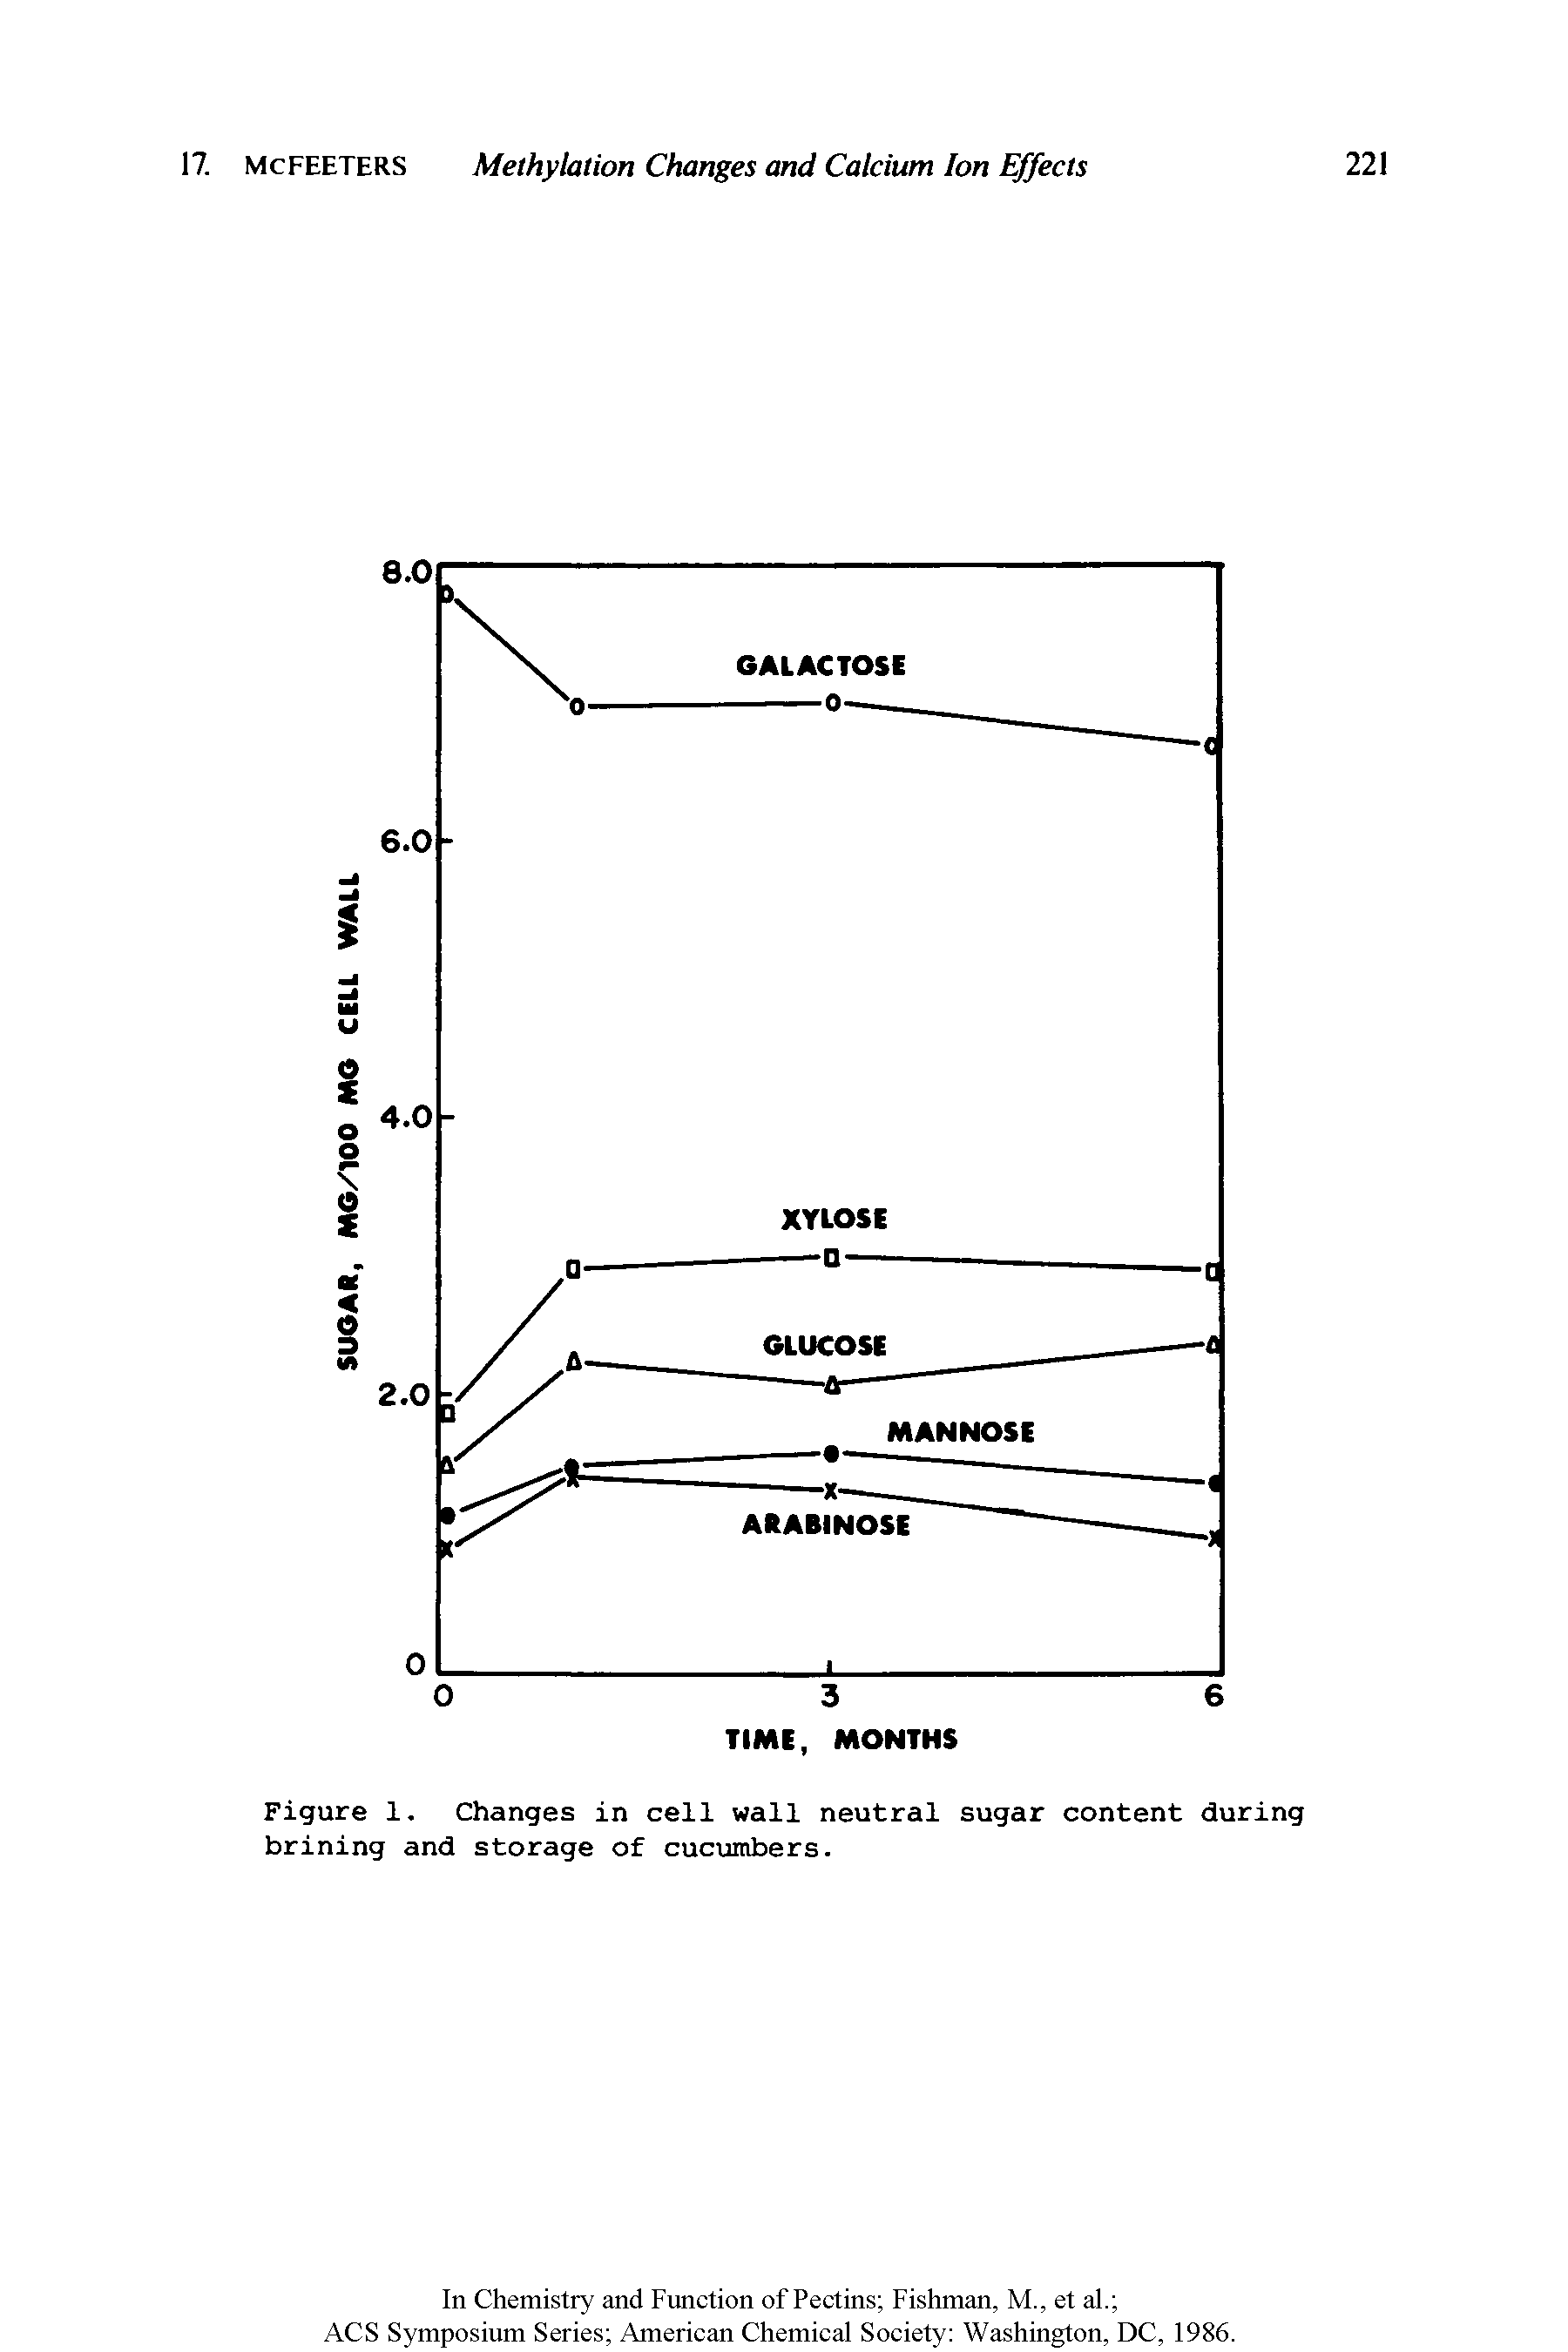 Figure 1. Changes in cell wall neutral sugar content during brining and storage of cucumbers.